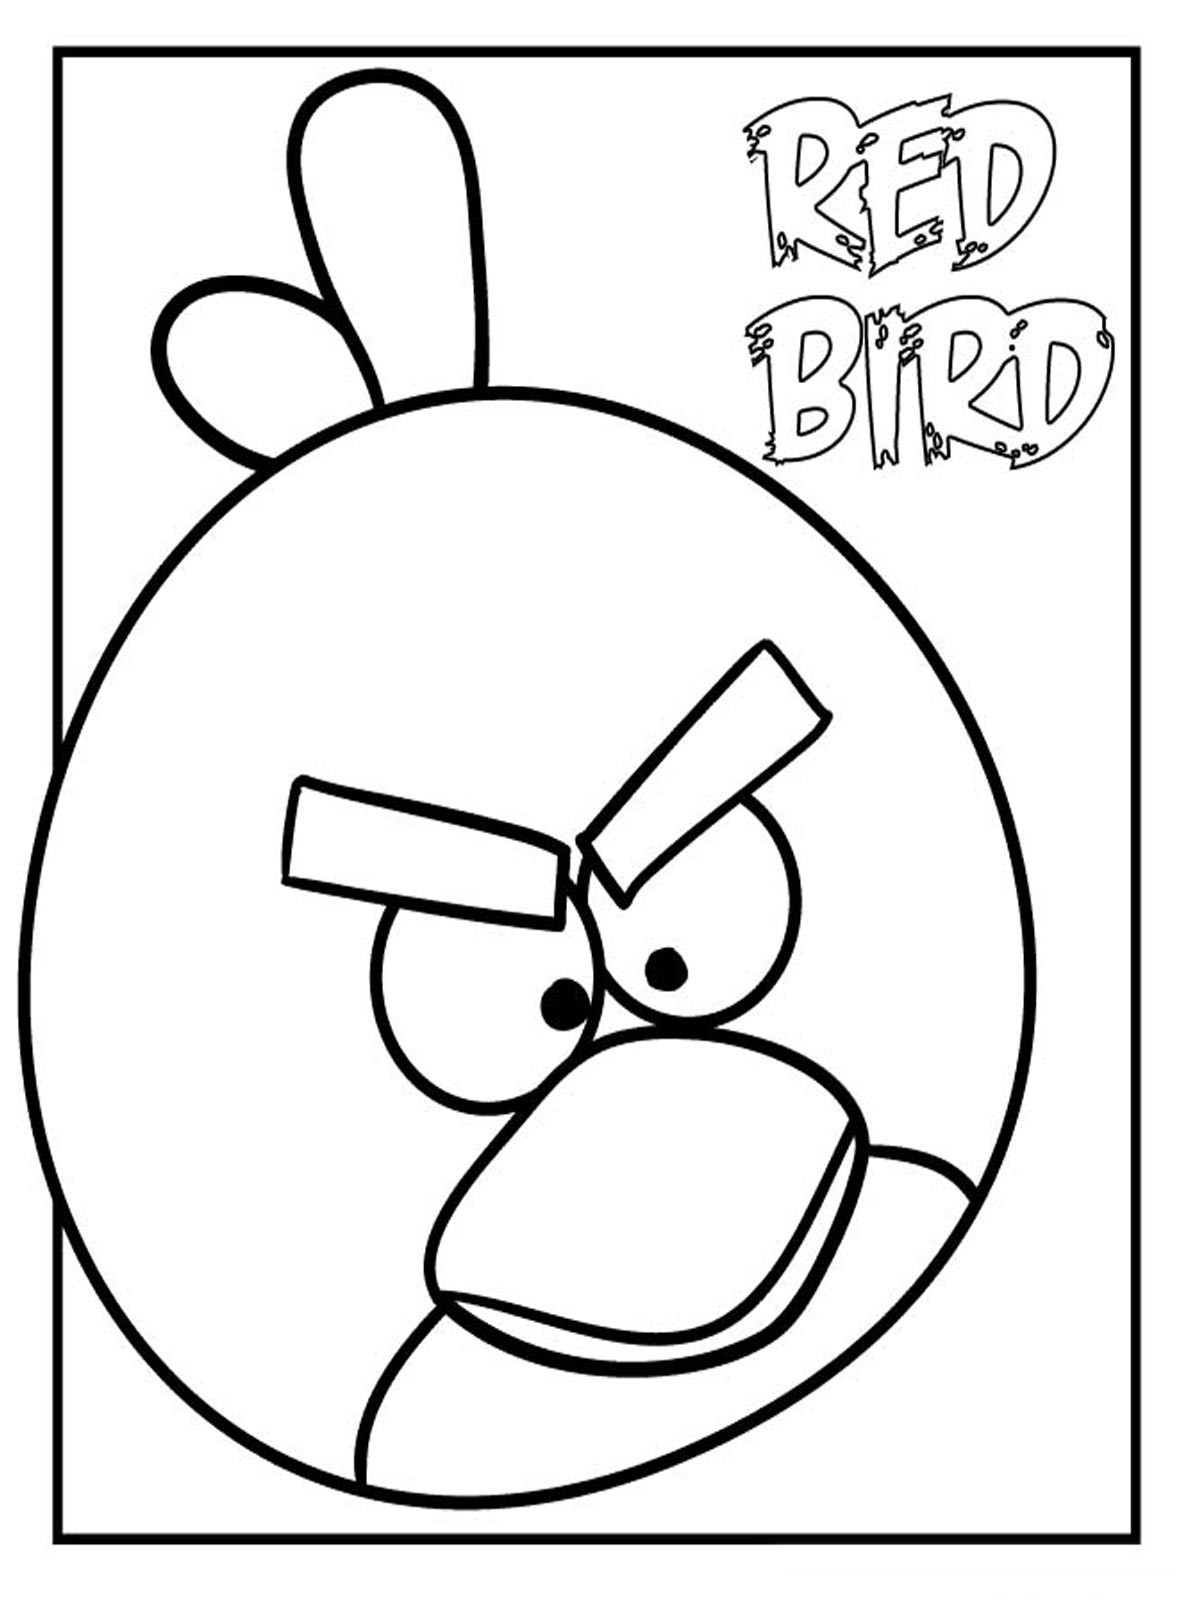 Angry Bird Printable Coloring Pages
 Angry Birds Colouring Pages that You Can Use as Templates